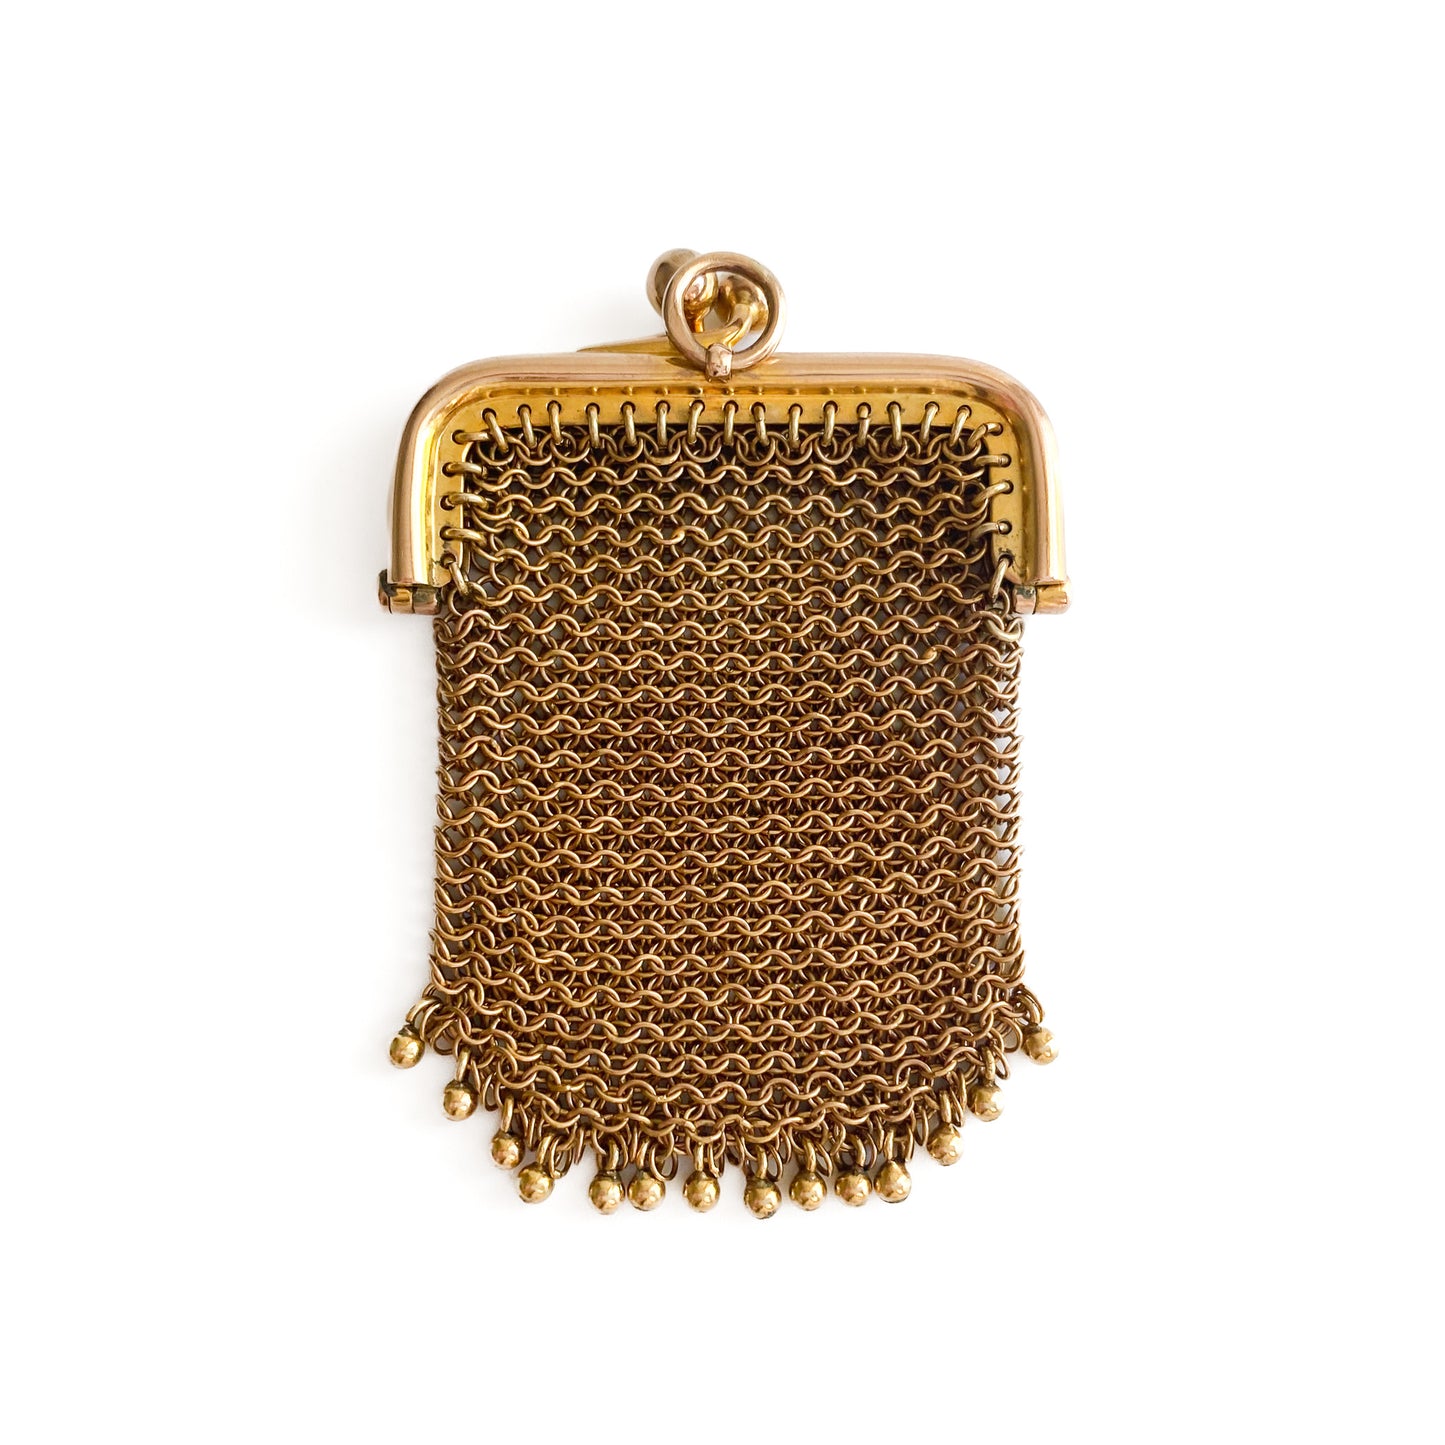 Very unique Victorian 9ct rose gold mesh purse that can open to hold something inside. Ideal to be worn as a pendant.